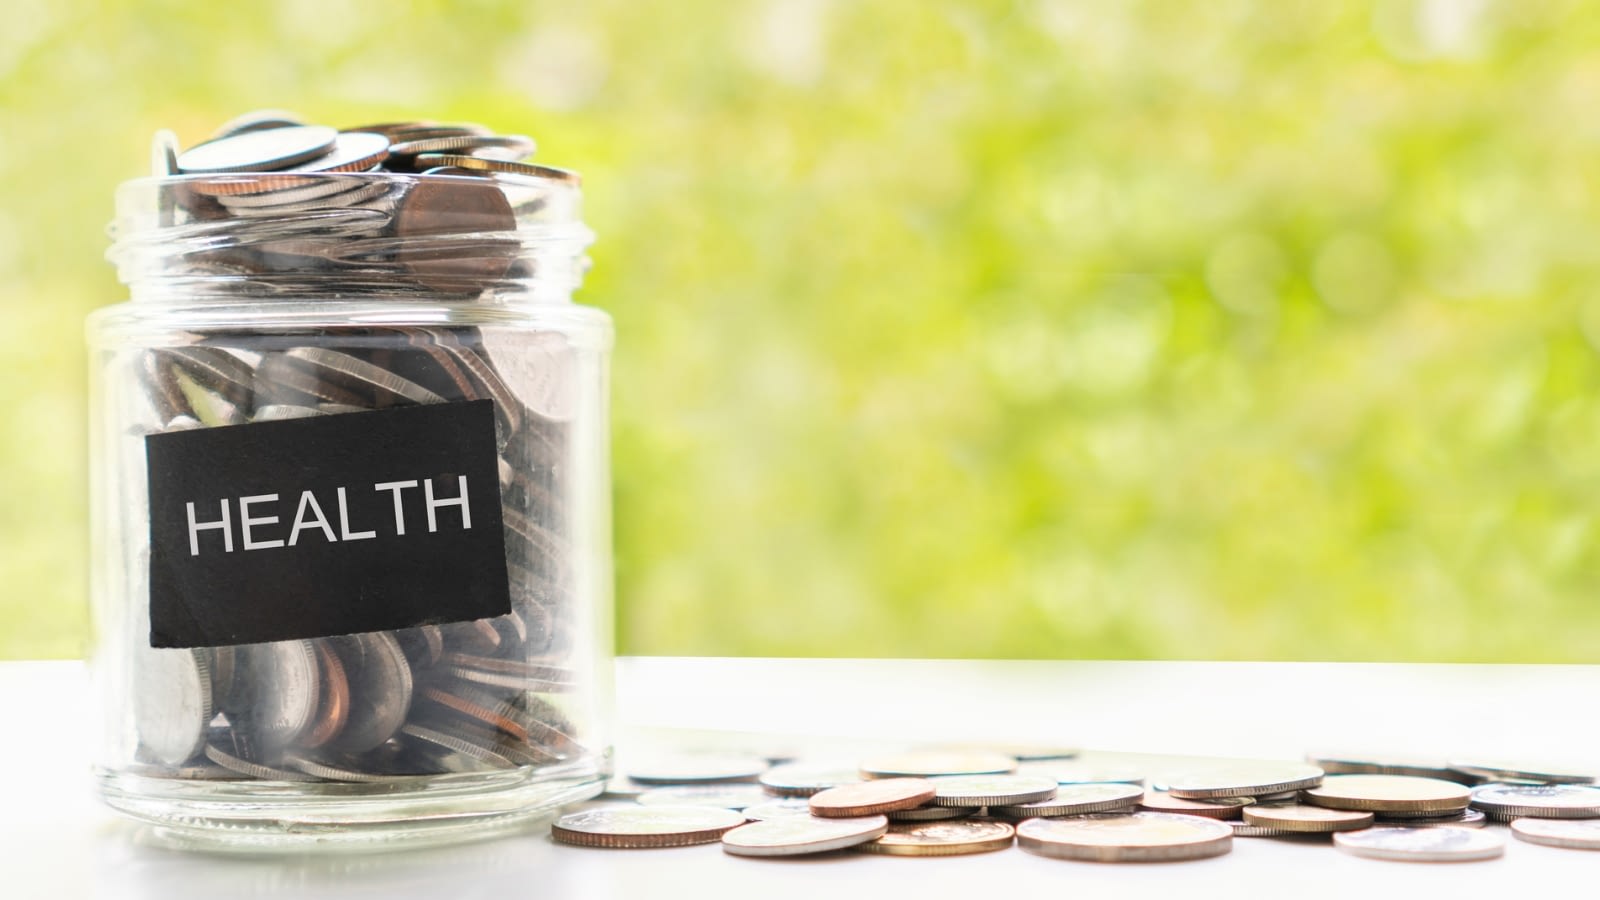 coins in a jar labeled health